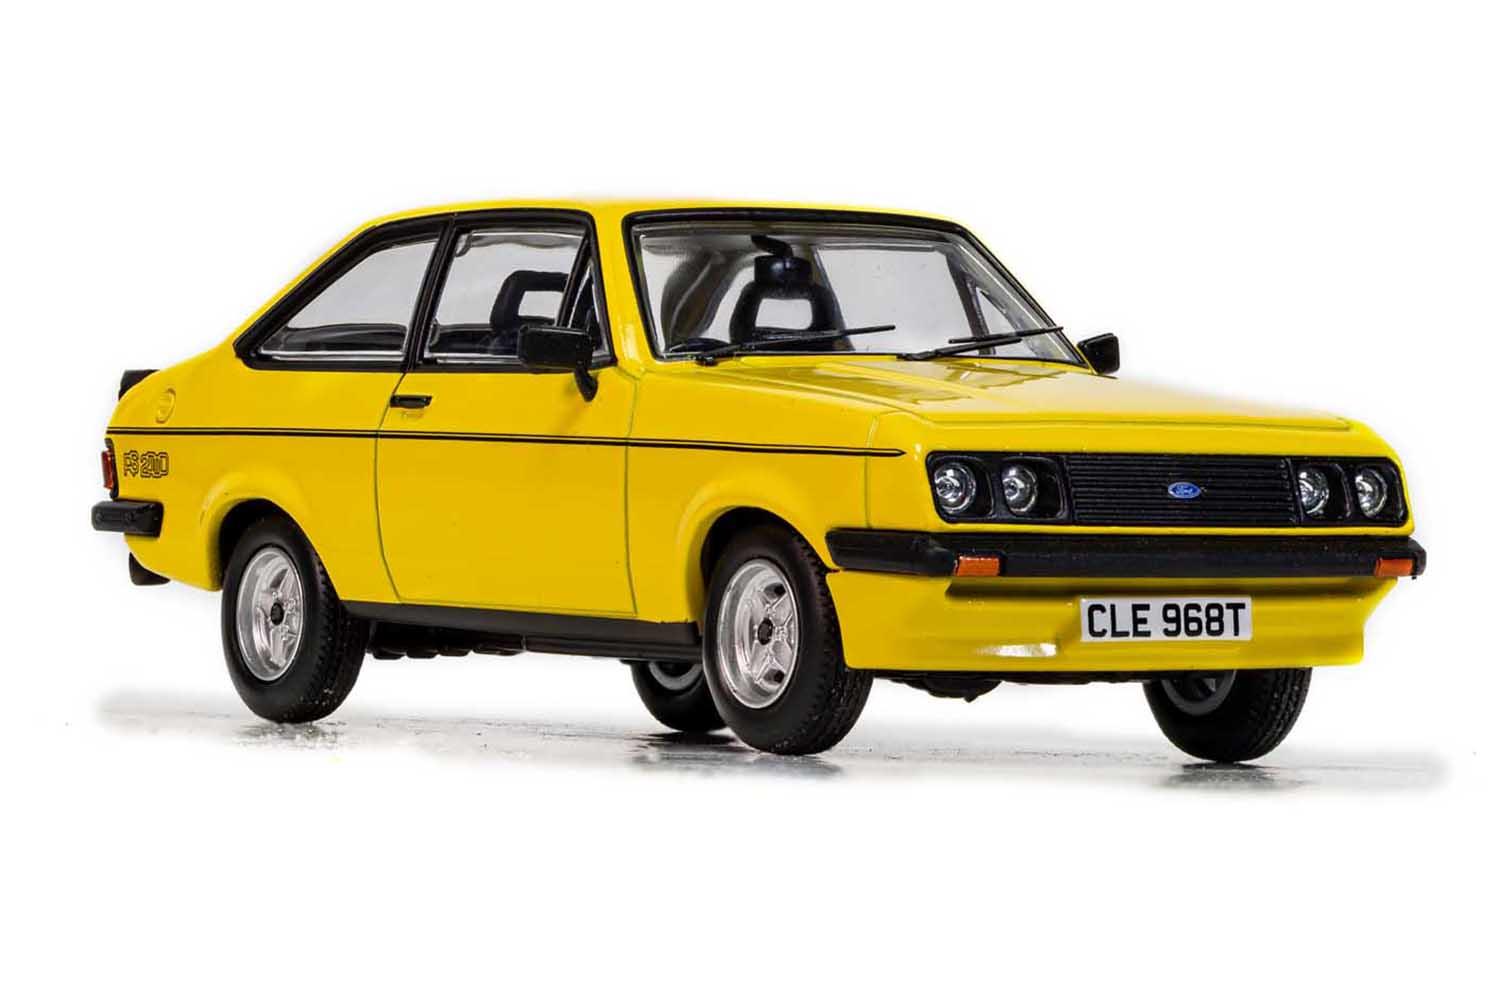 Ford Escort mk 2 RS2000 custom in signal yellow 1:43 scale model from Corgi Vanguards, limited edition model